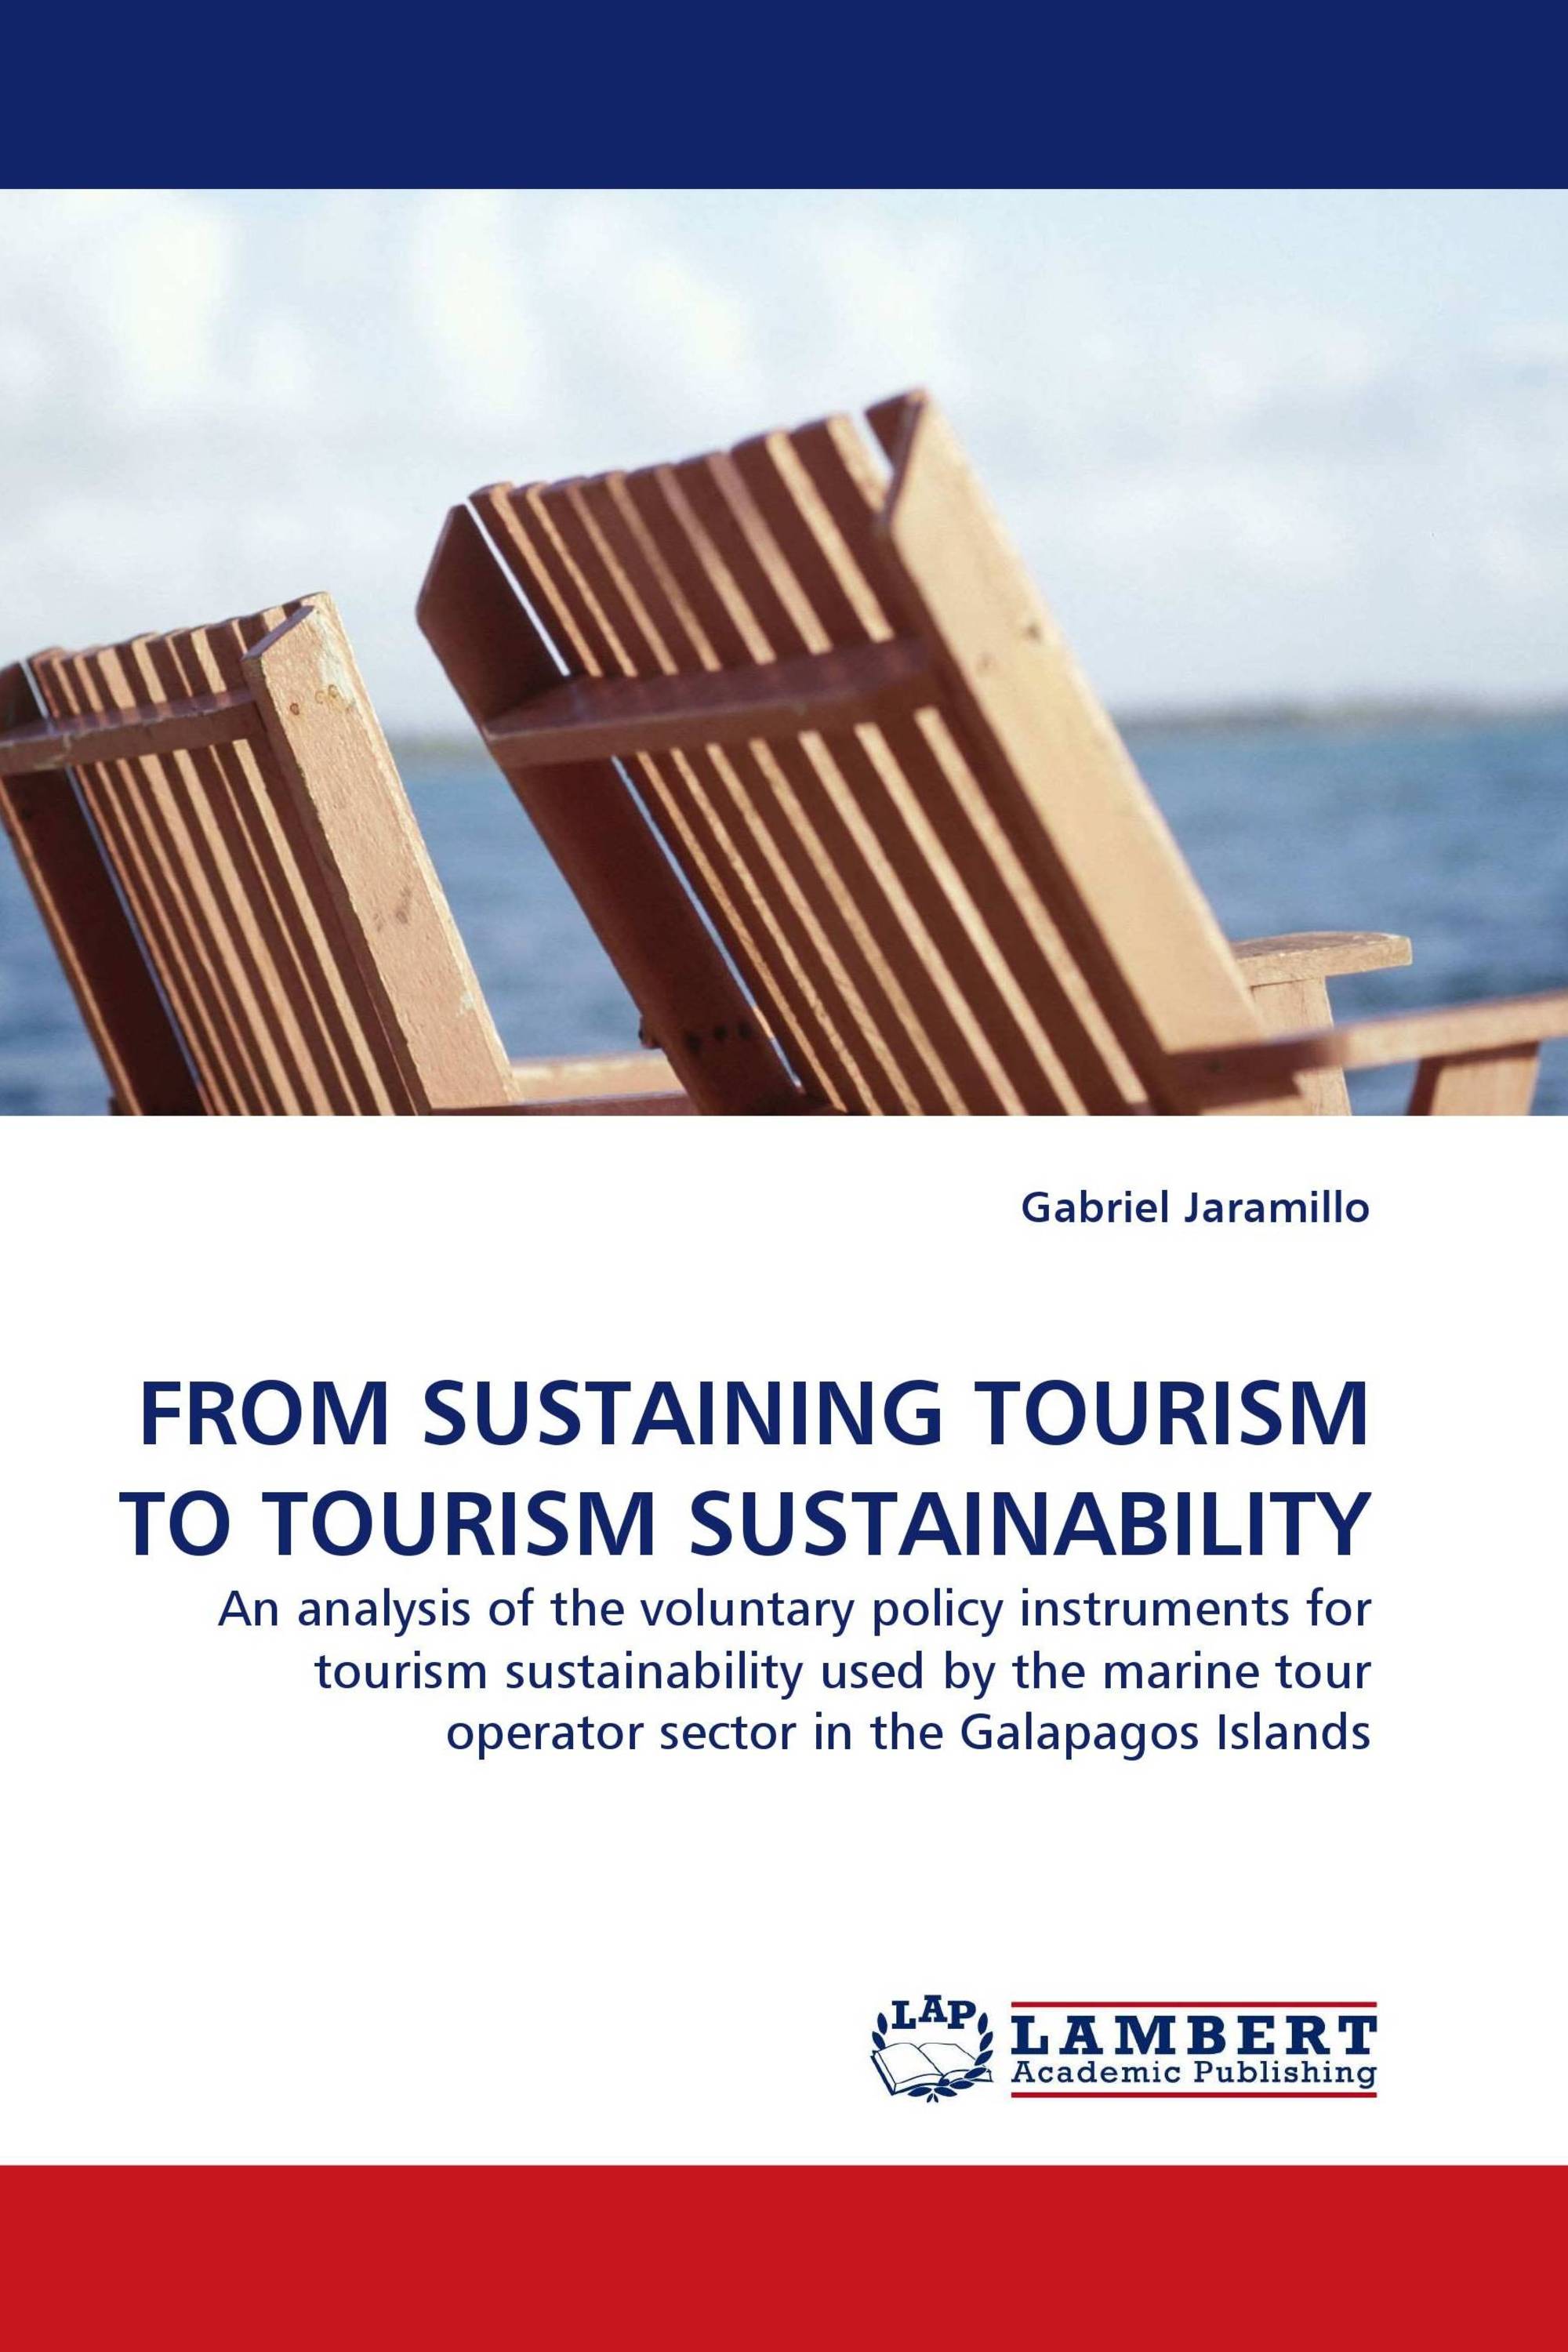 journal of sustainable tourism impact factor